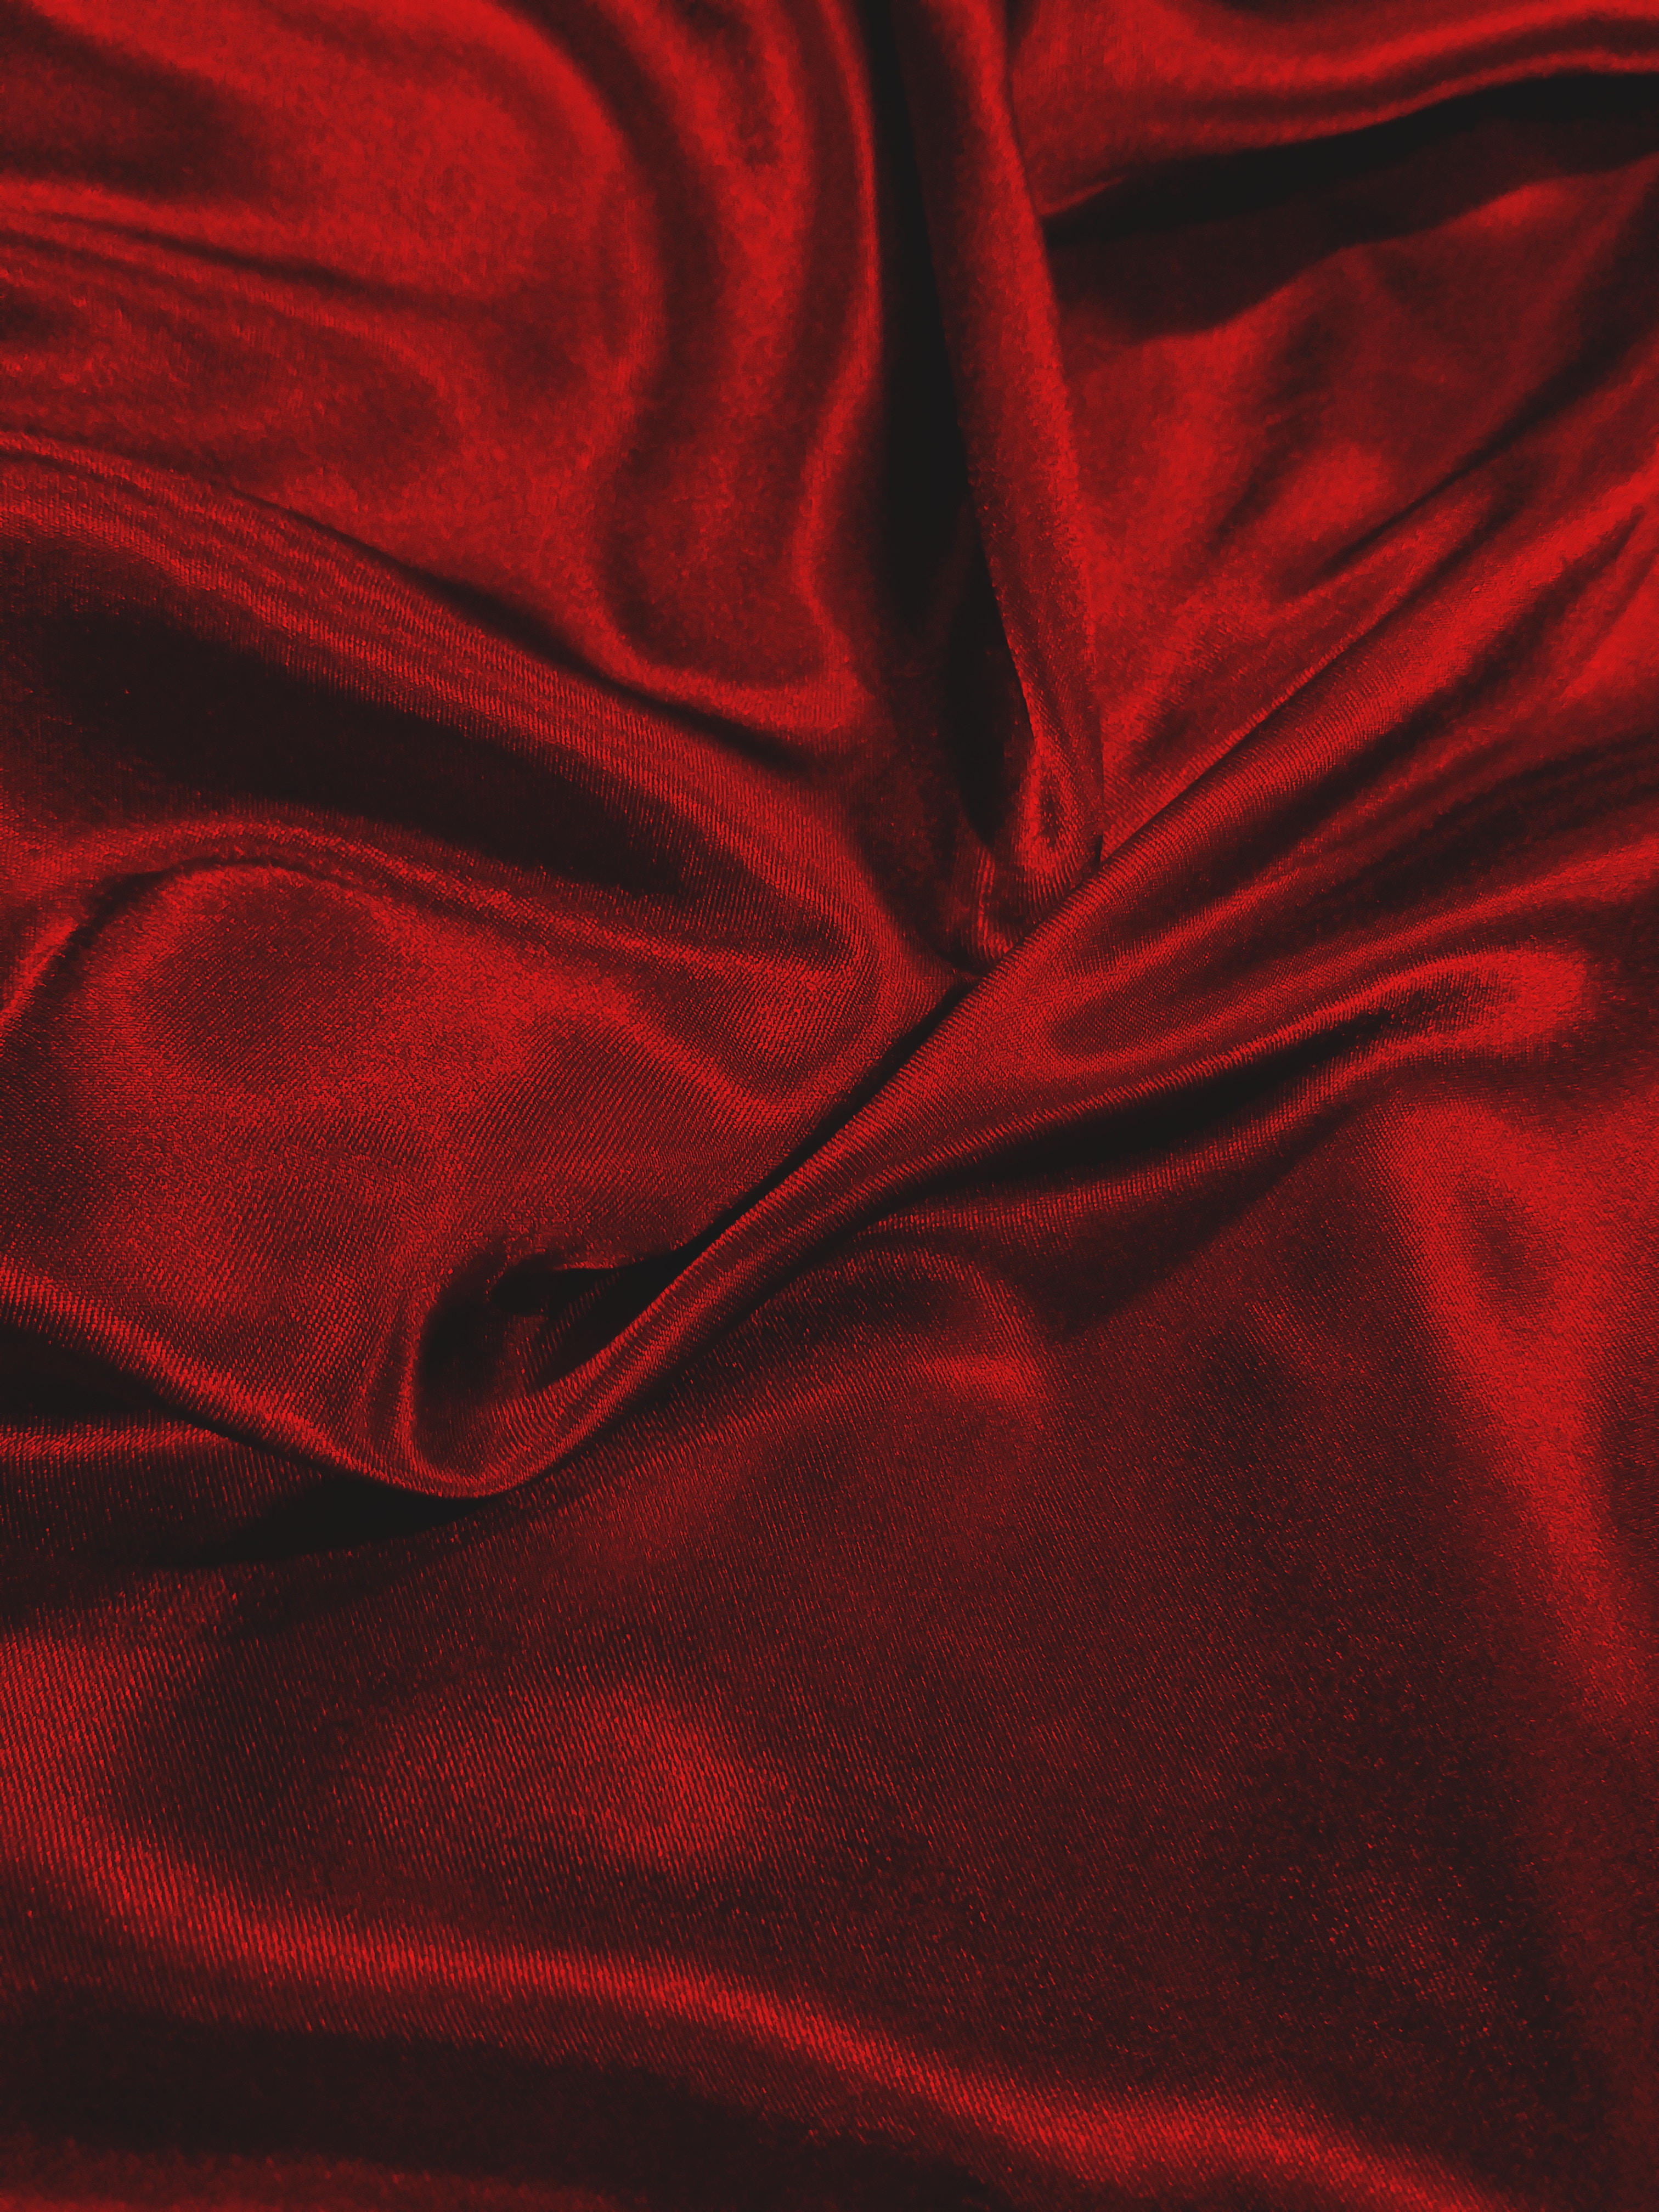 red, shine, texture, textures, brilliance, cloth, folds, pleating